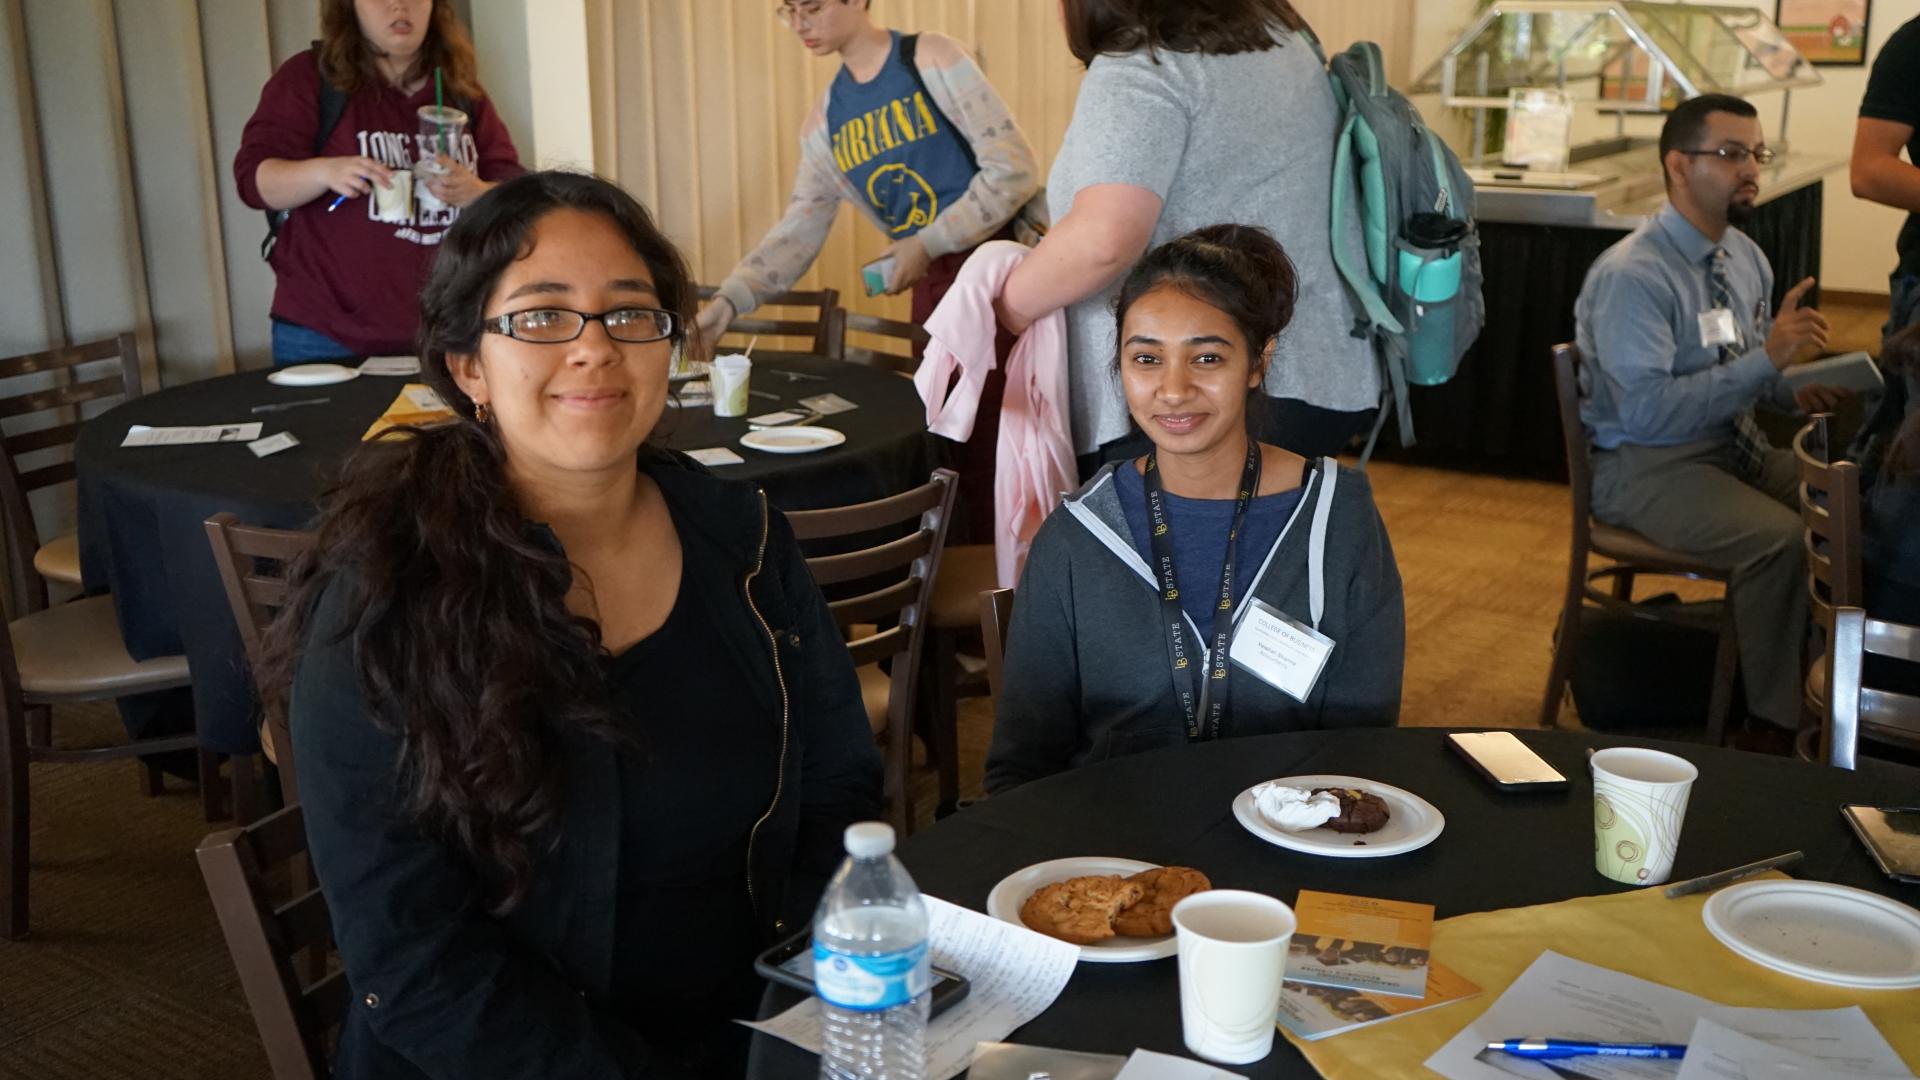 COB 2019 HONORS LIFE AFTER attendees Enjoy a lunch